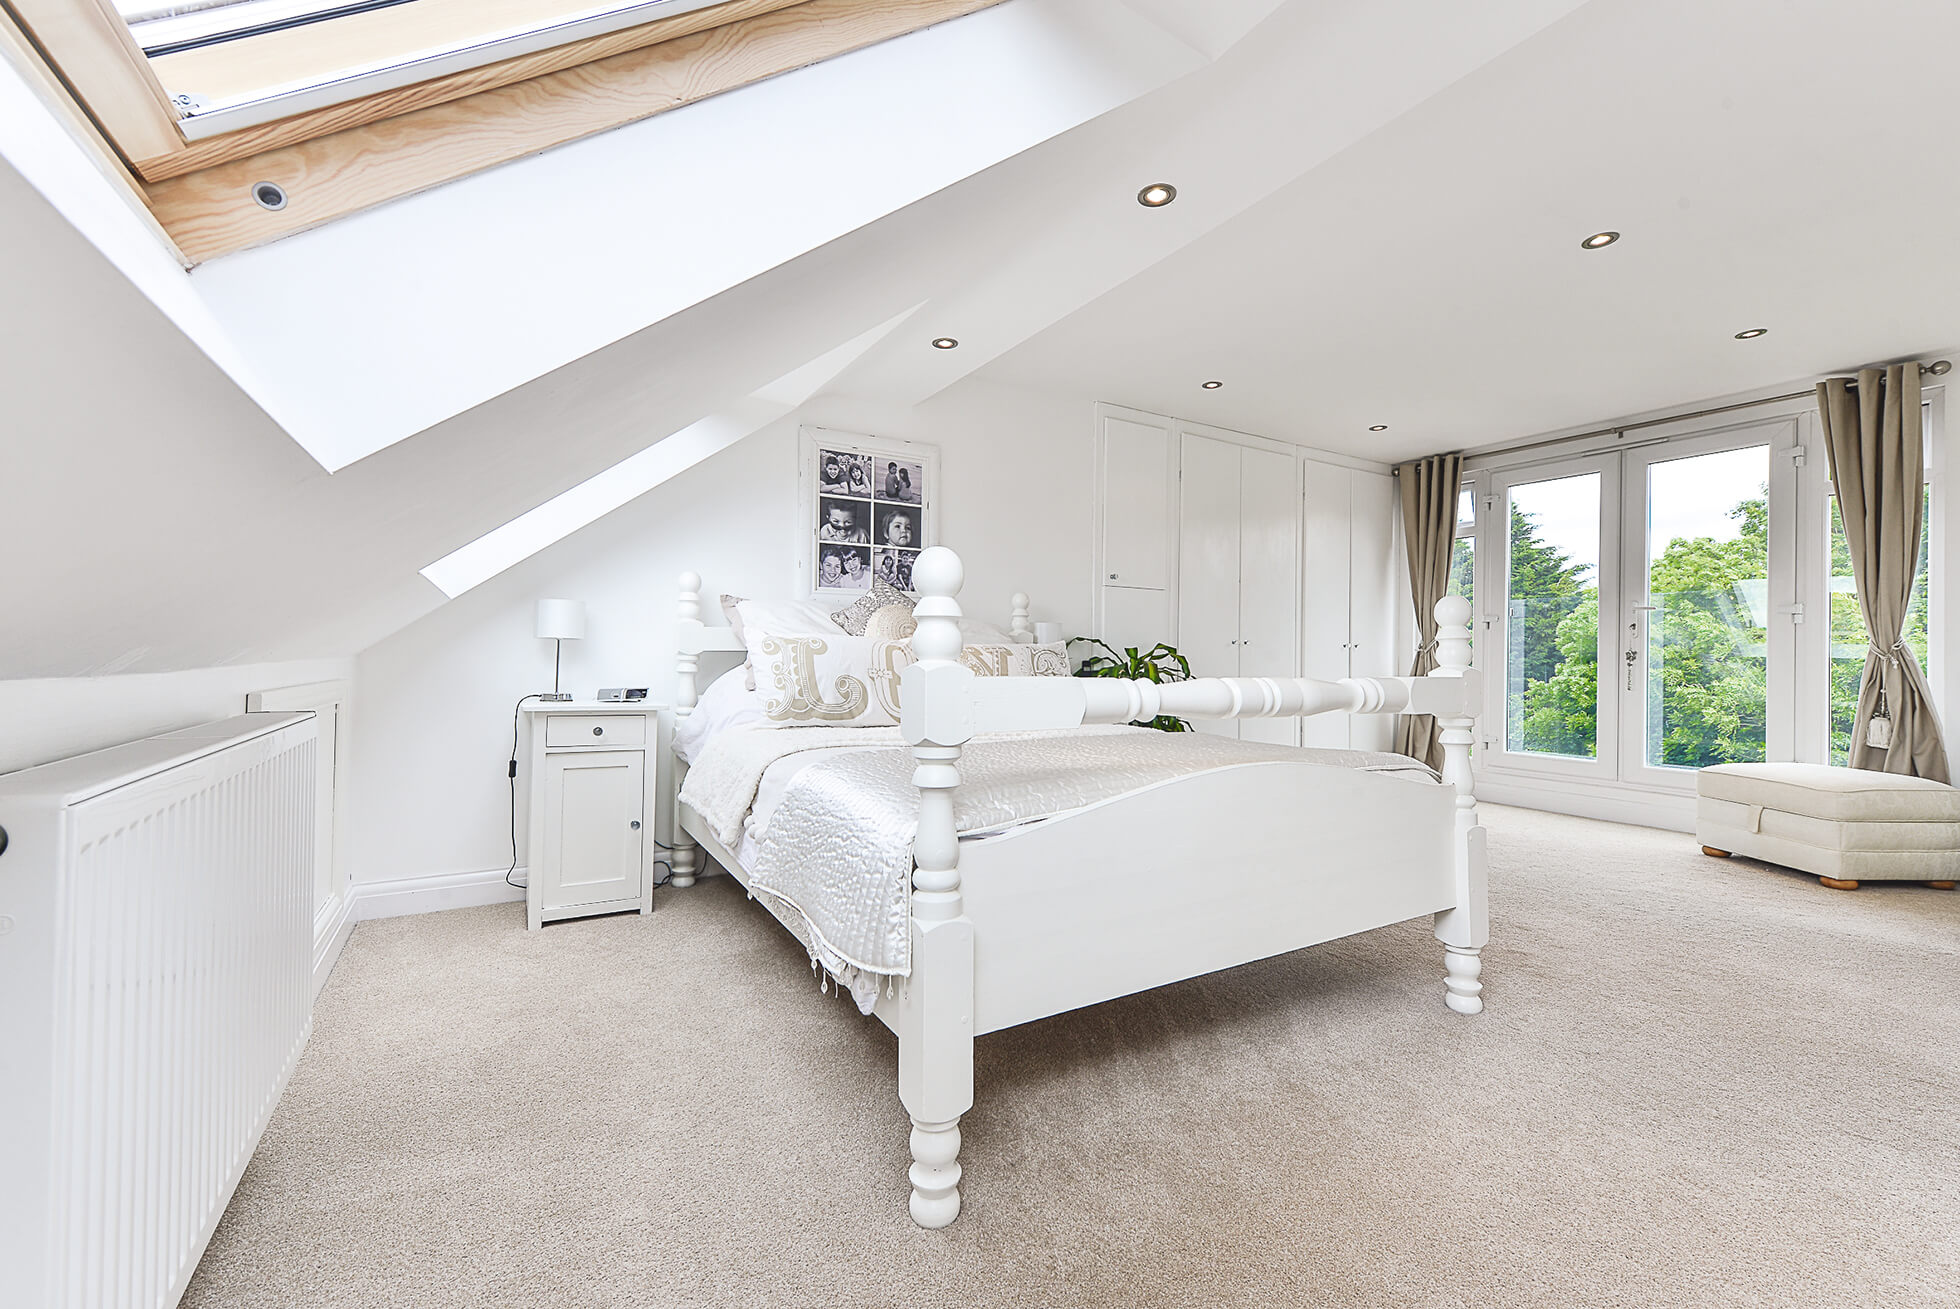 Do you have a question about converting your Loft in Hemel Hempstead? Here are the most popular questions asked by our clients.